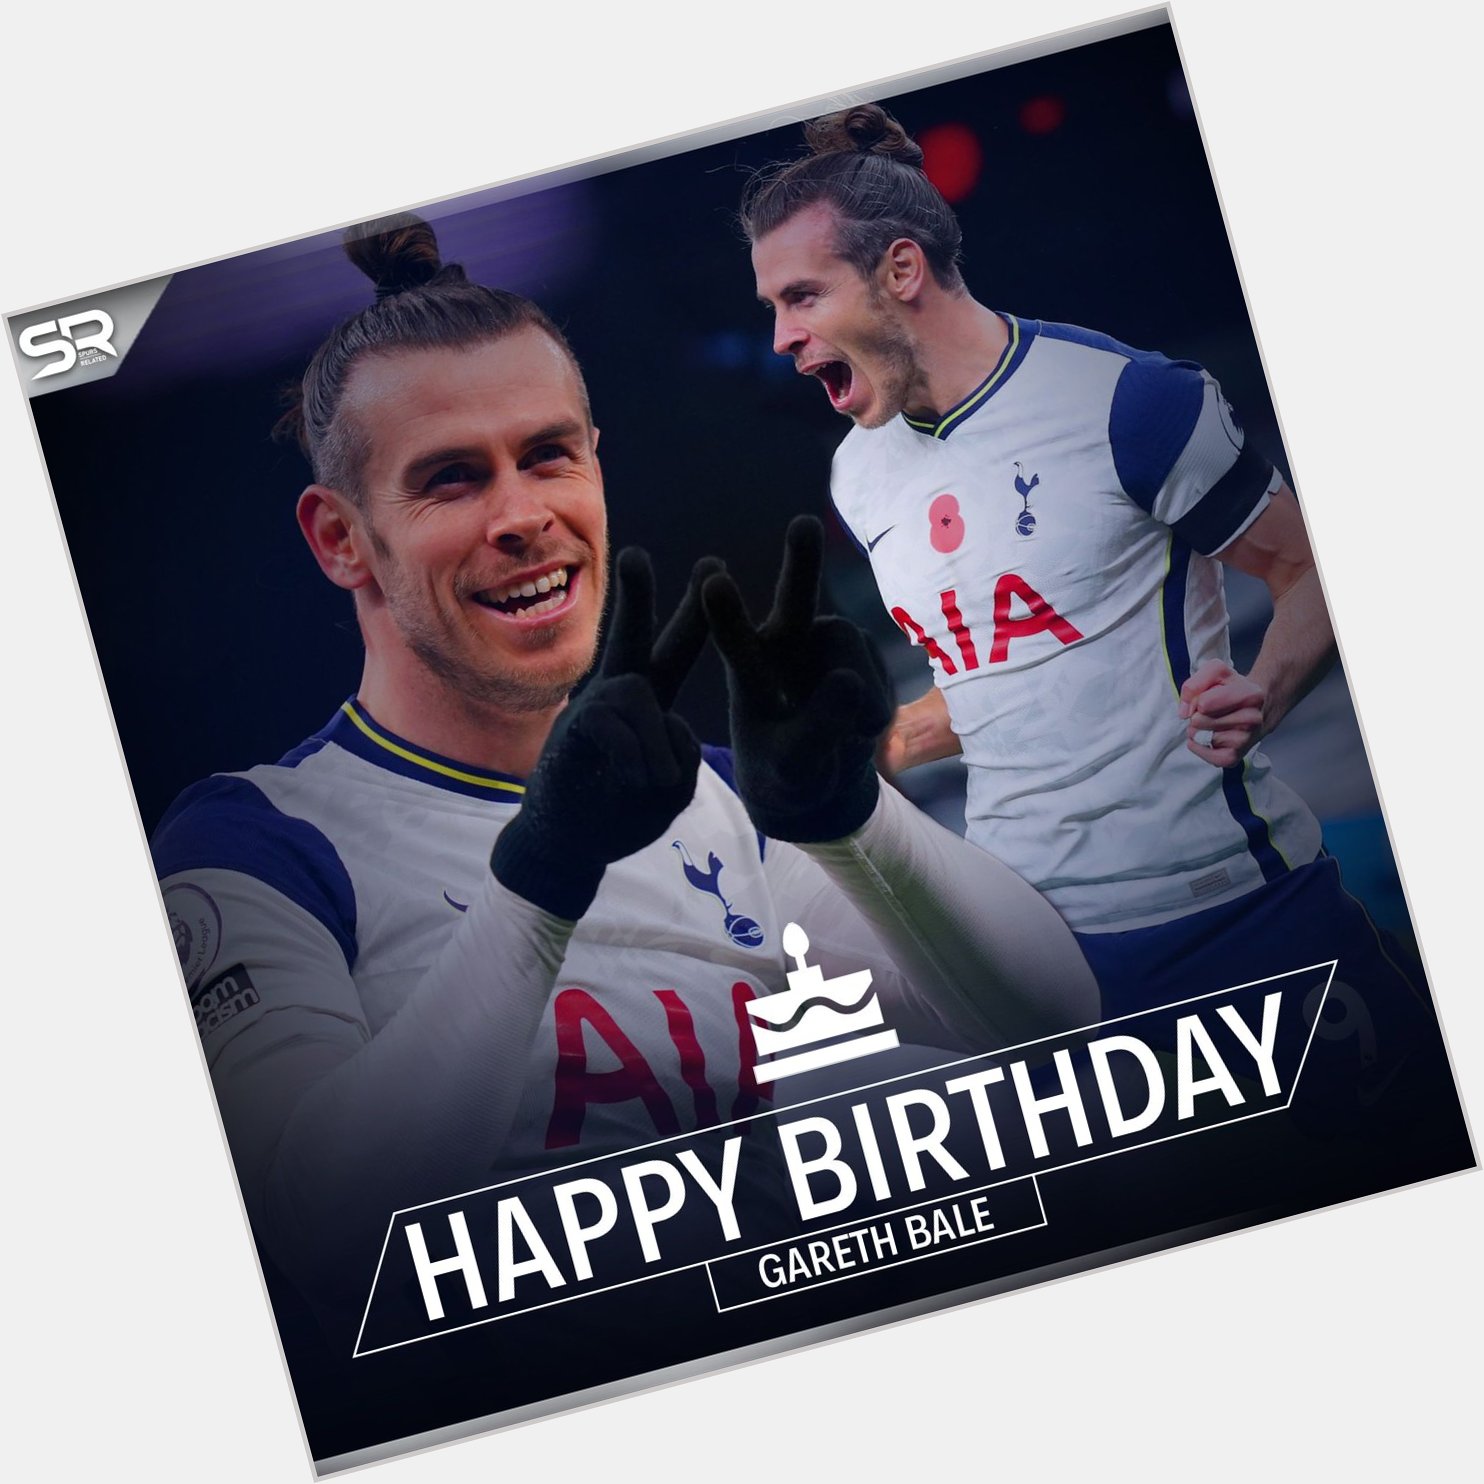  Happy 32nd Birthday to Gareth Bale       !
& Happy 33rd Birthday to Mousa Dembele  !  